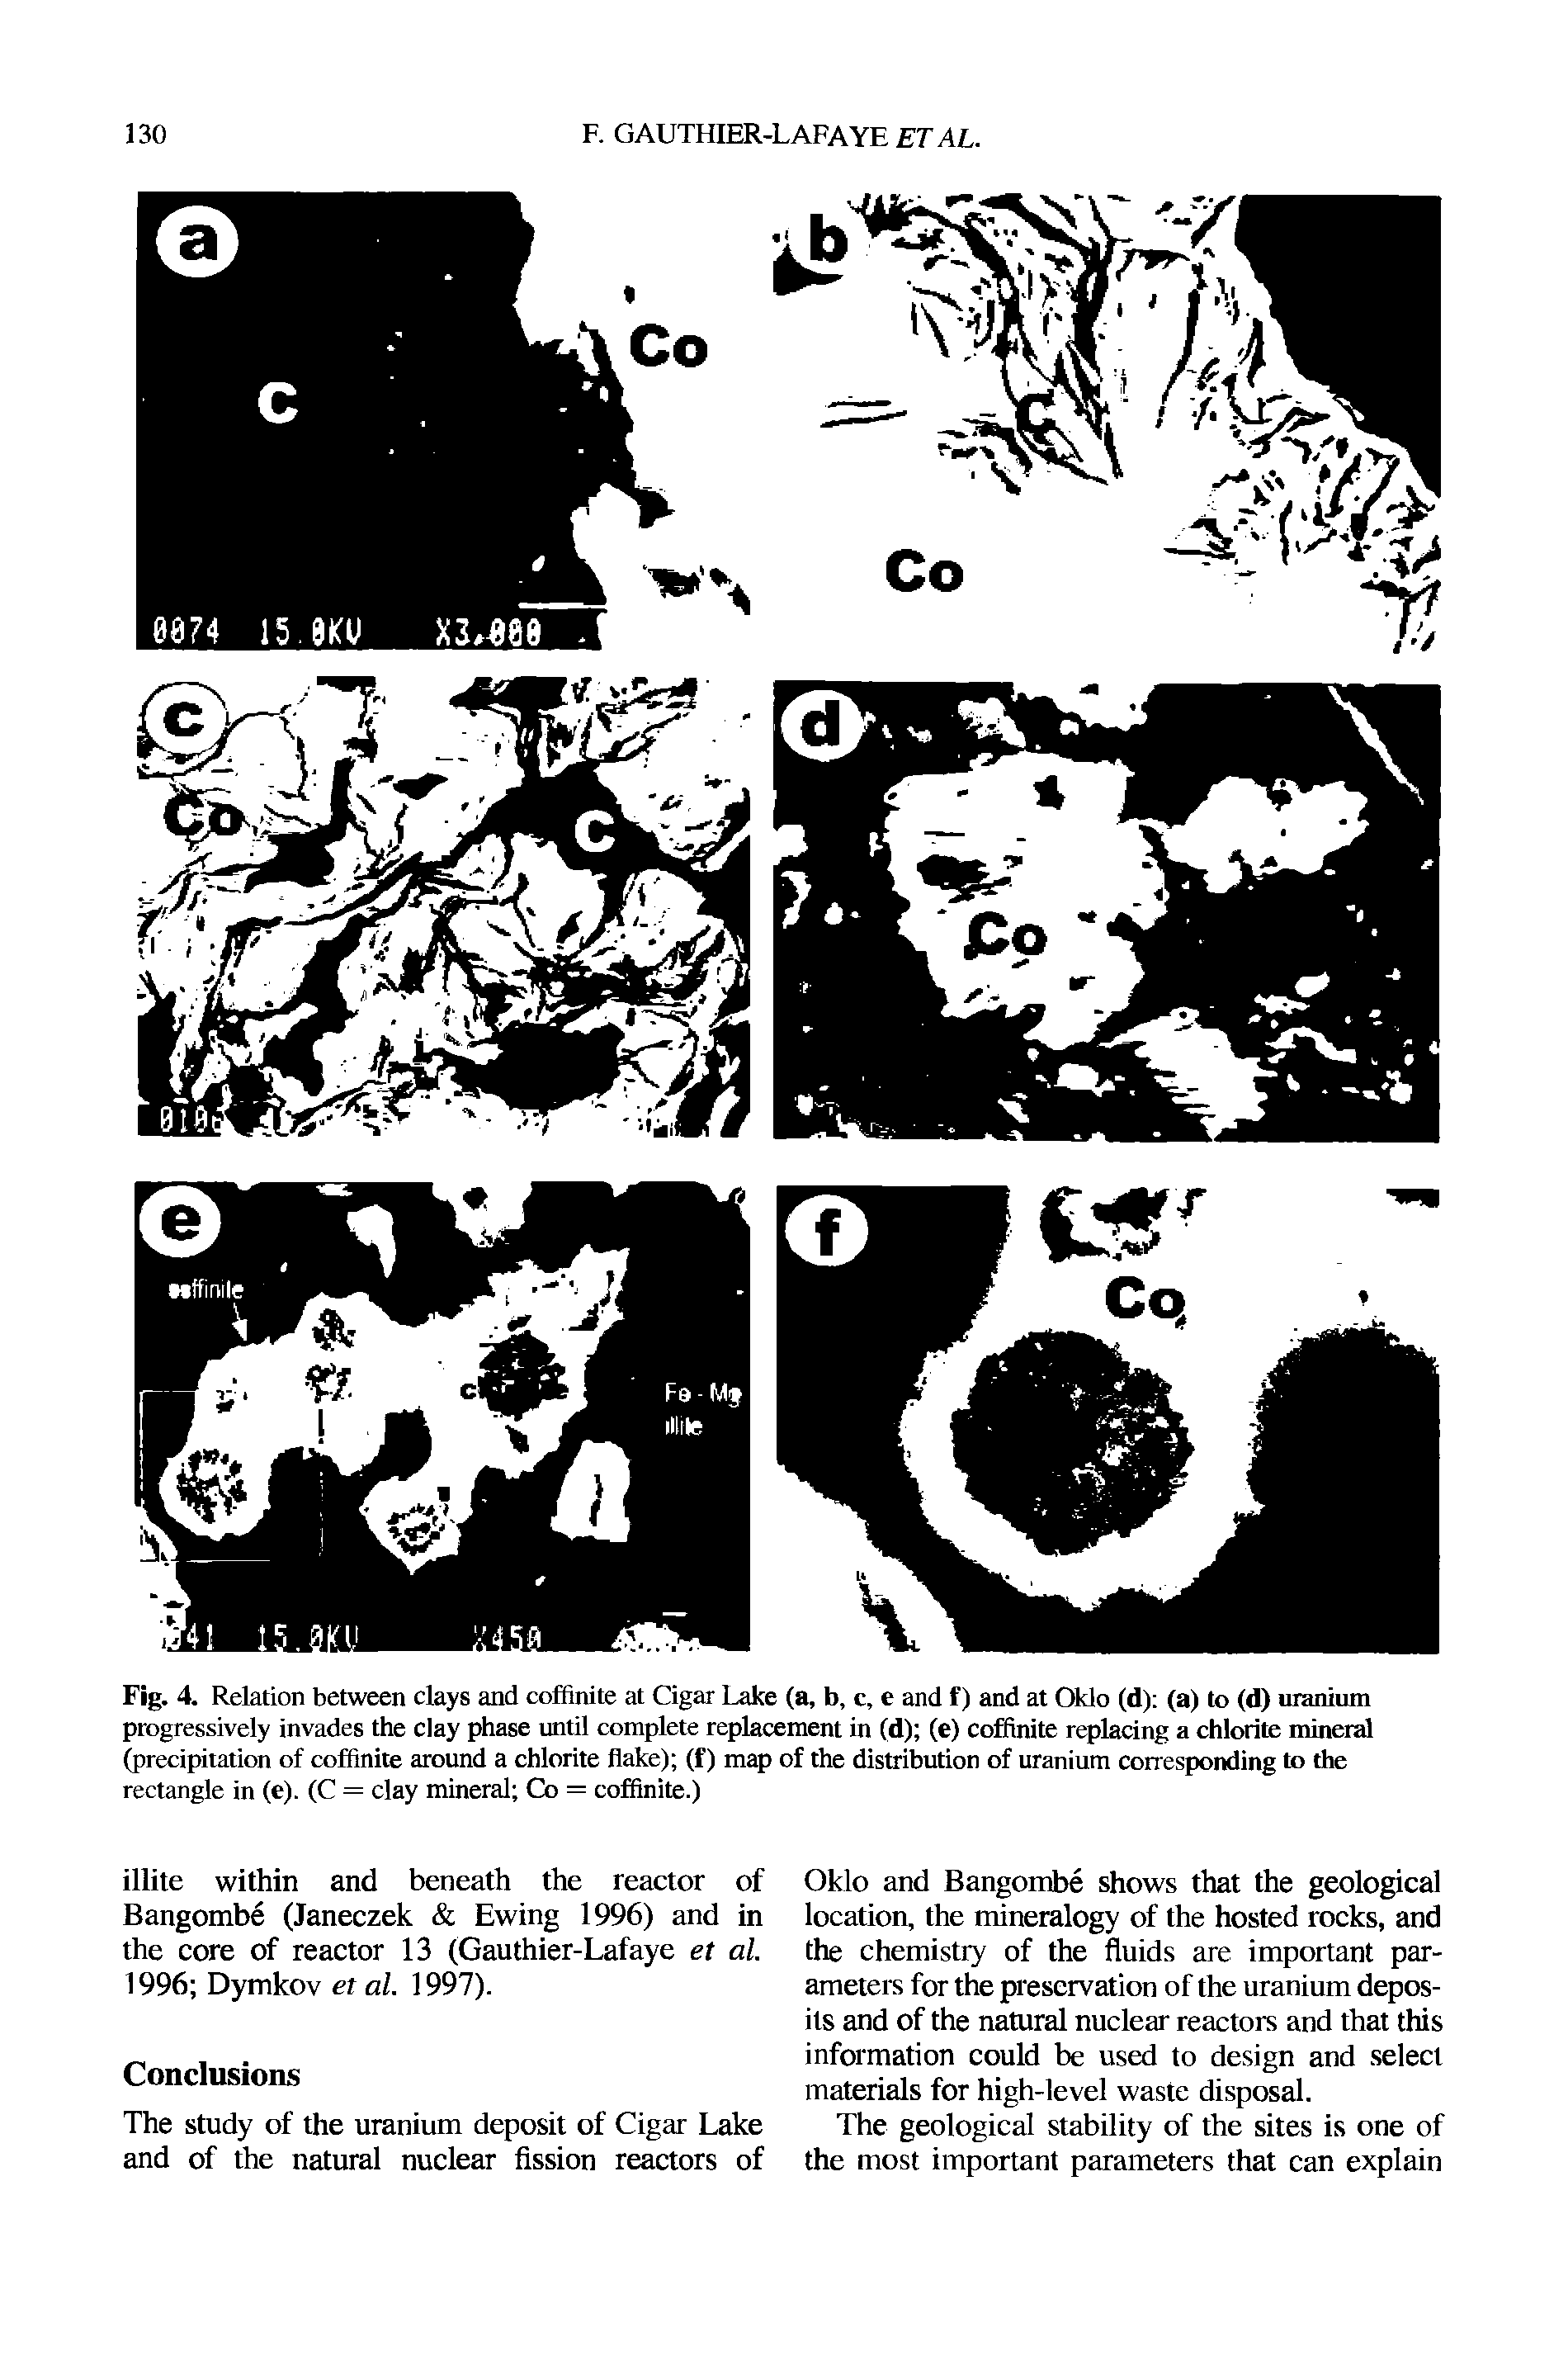 Fig. 4. Relation between clays and coffinite at Cigar Lake (a, b, c, e and f) and at Oklo (d) (a) to (d) uranium progressively invades the clay phase until complete replacement in (d) (e) coffinite replacing a chlorite mineral (precipitation of coffinite around a chlorite flake) (f) map of the distribution of uranium corresponding to the rectangle in (e). (C = clay mineral Co = coffinite.)...